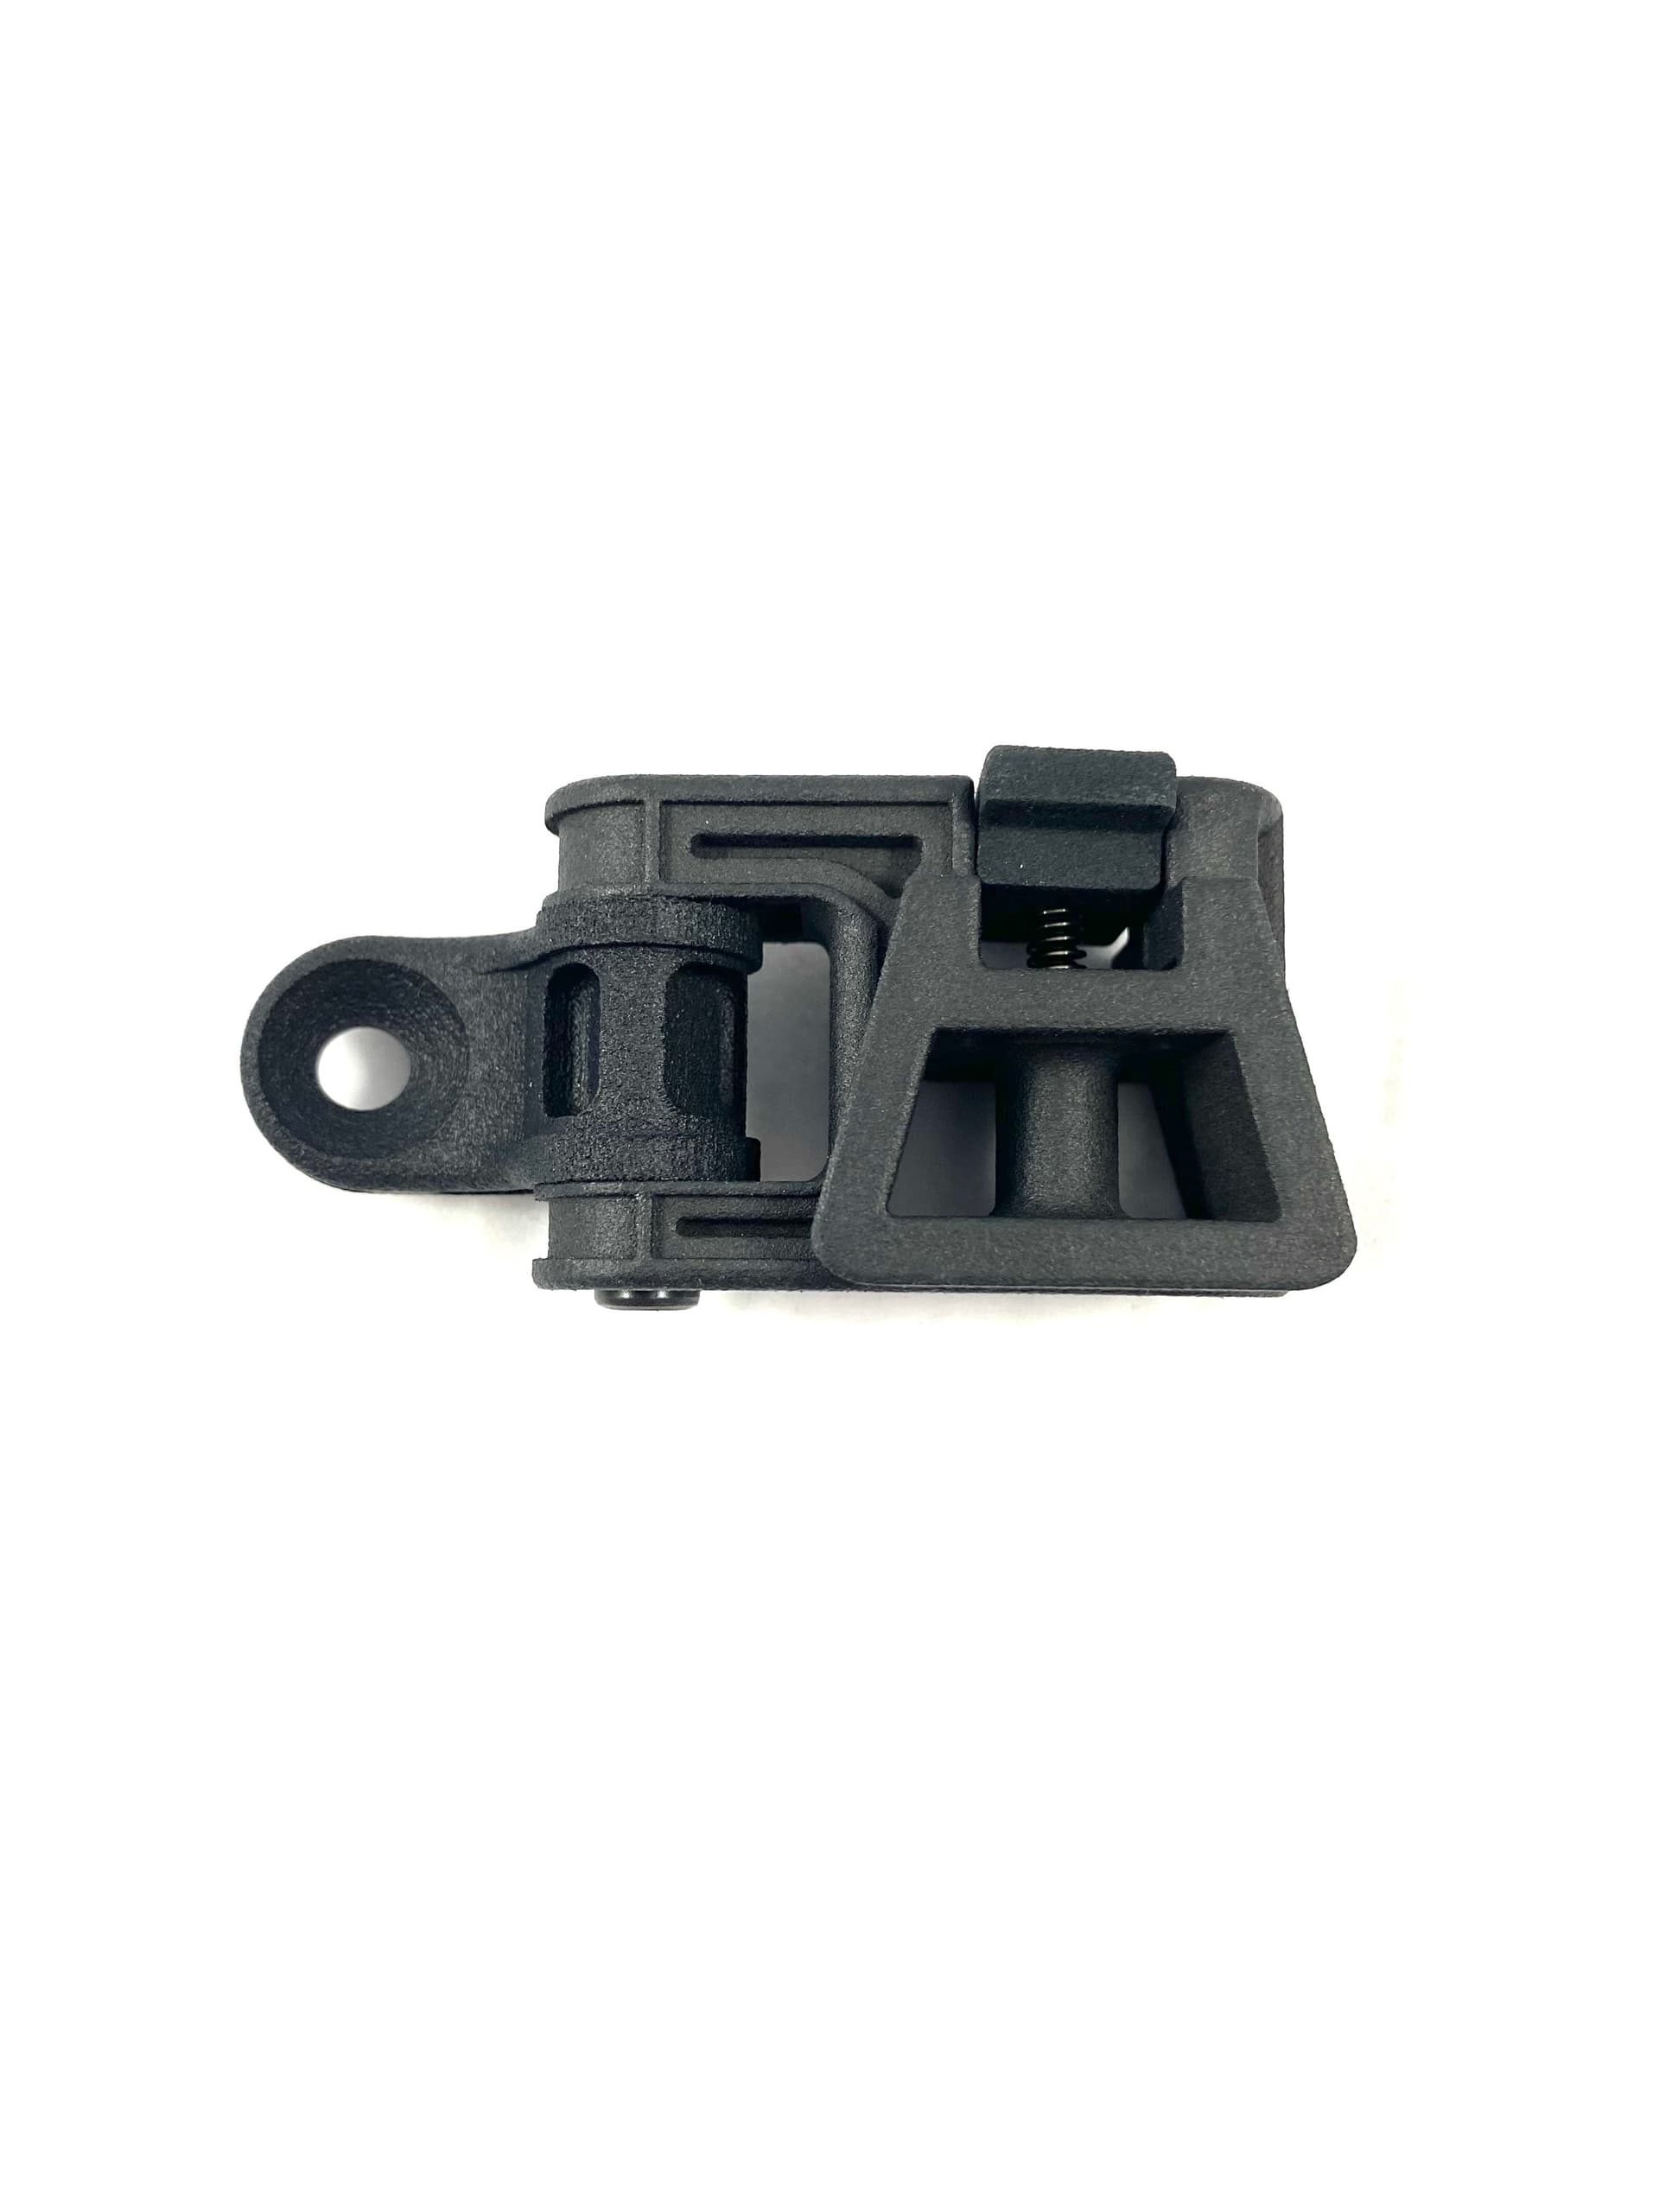 J-Arm with Dovetail for PVS-14 FW